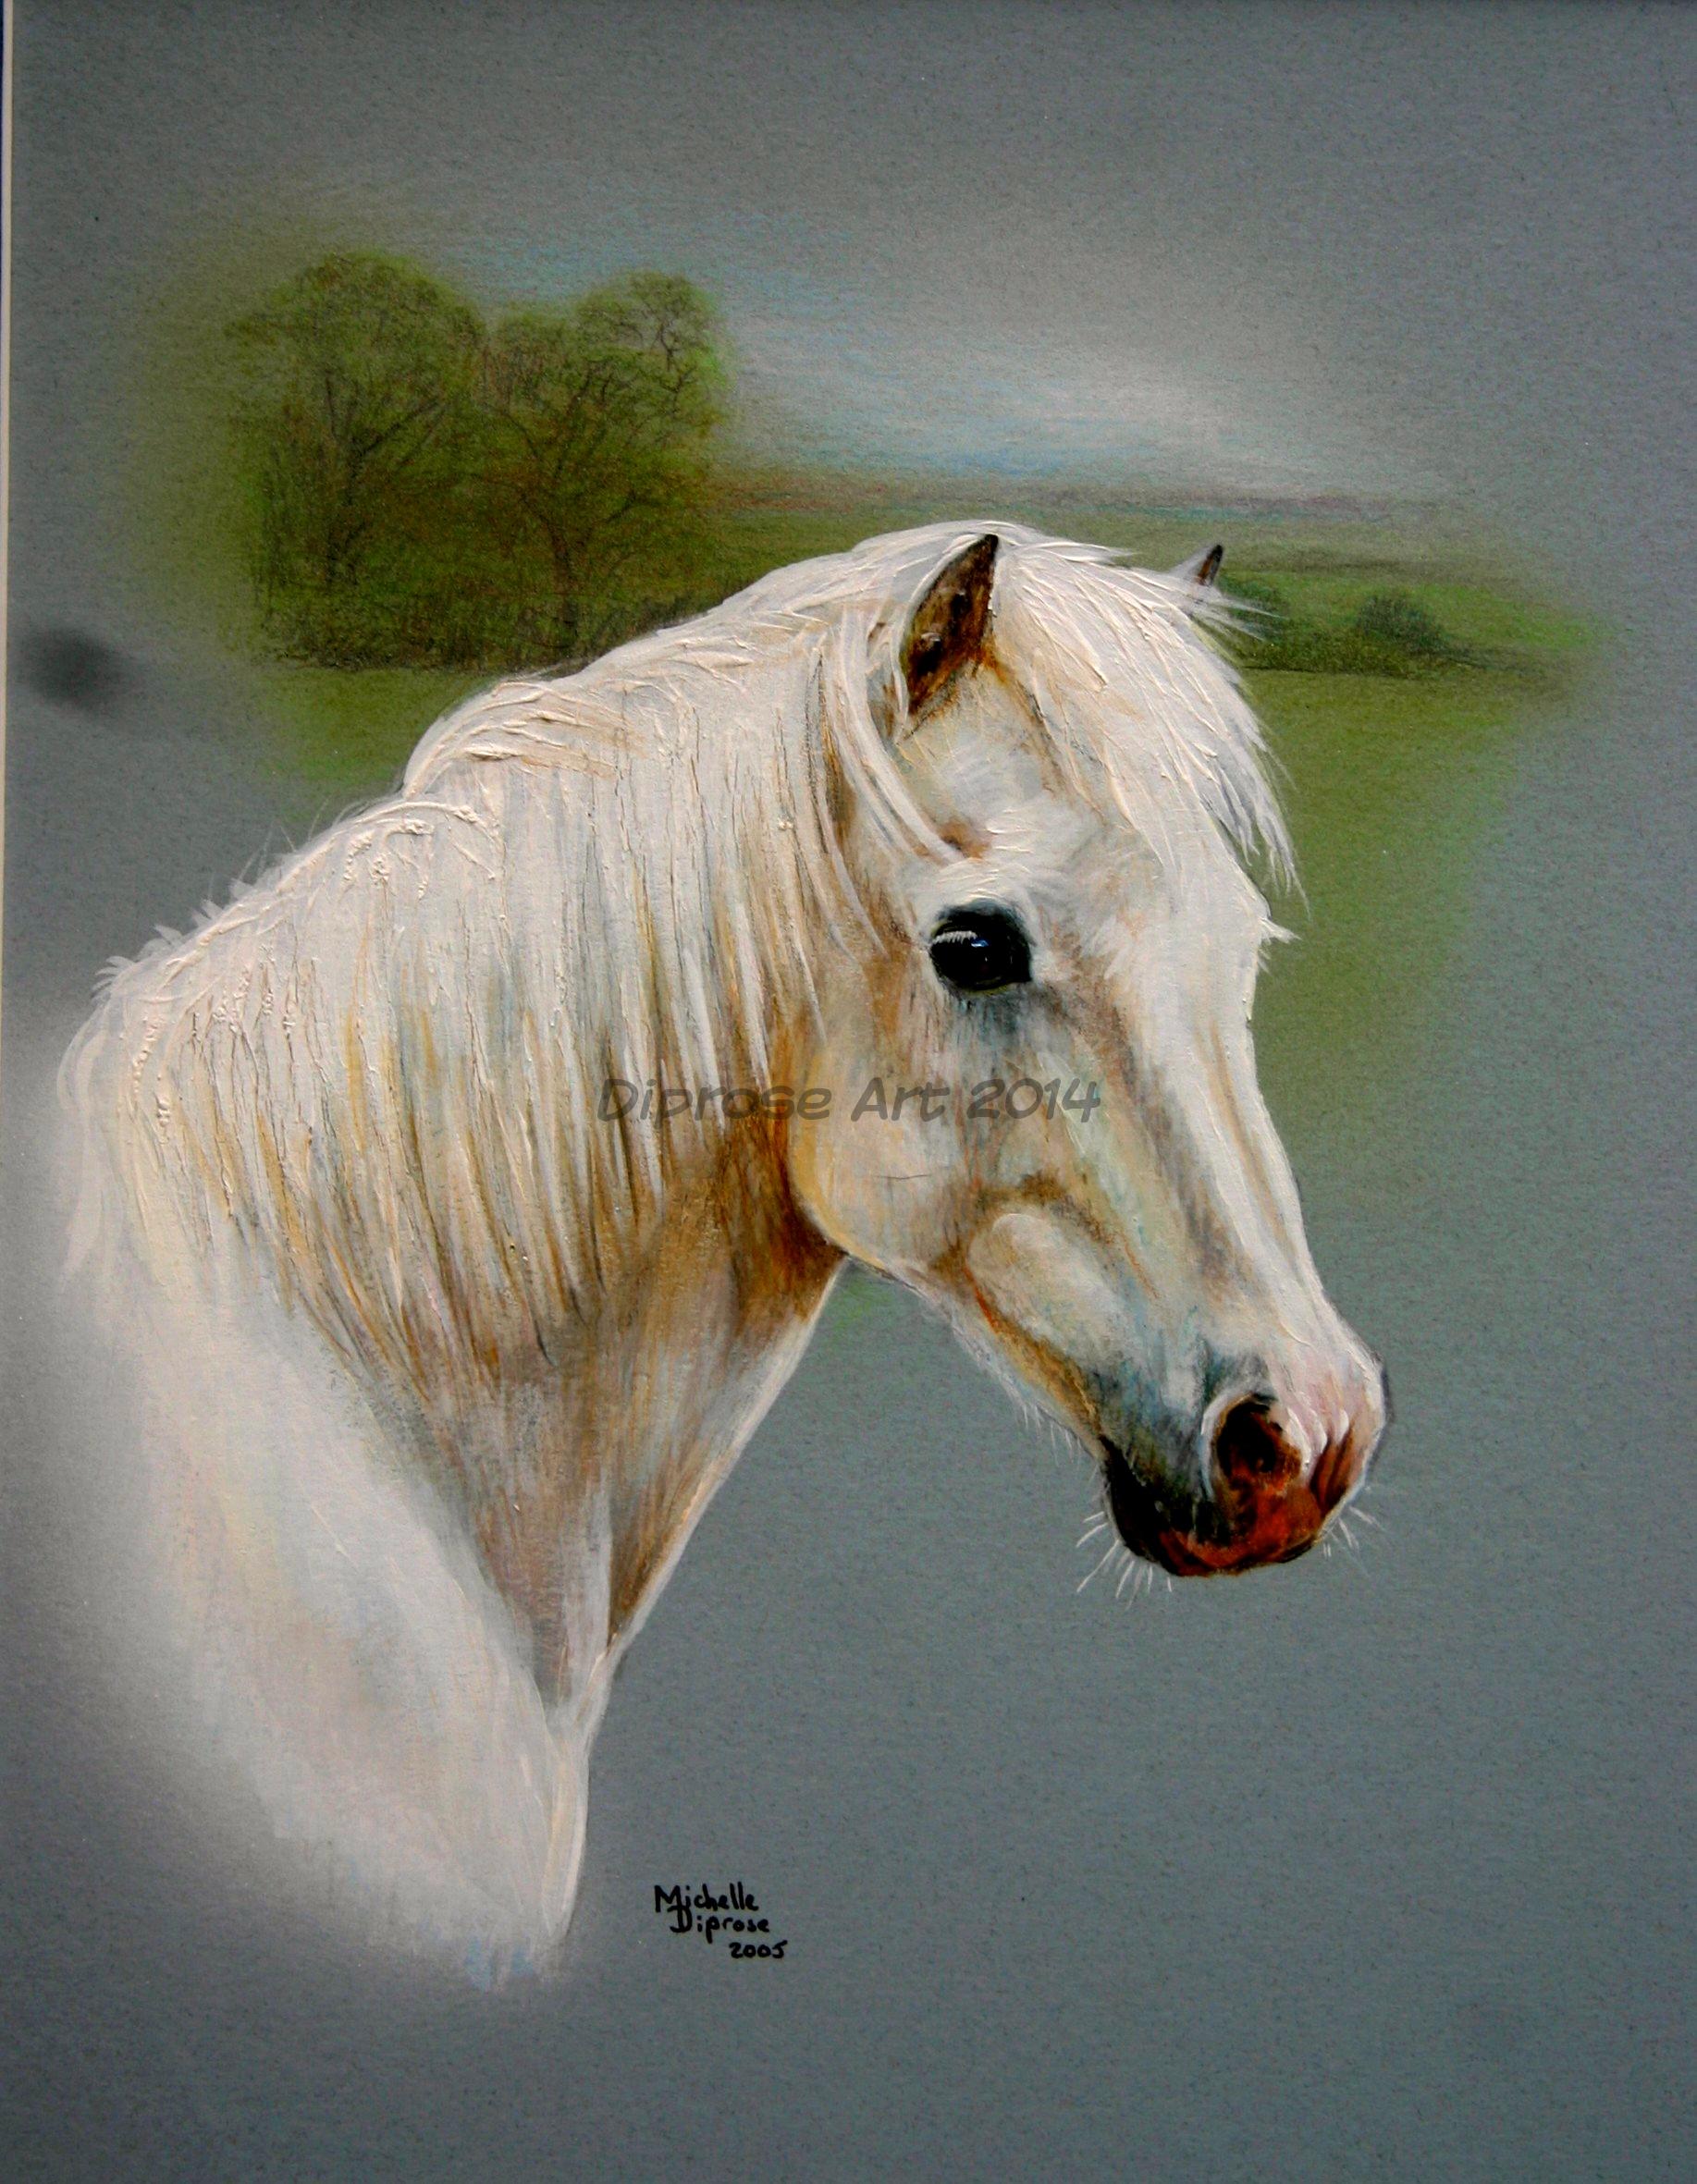 Acrylics on board - approx A4 -  horse portrait - This great old pony had been a legend for his owner - and still had a few impressive moves for his photo shoot!  A real strong character and so cheeky.